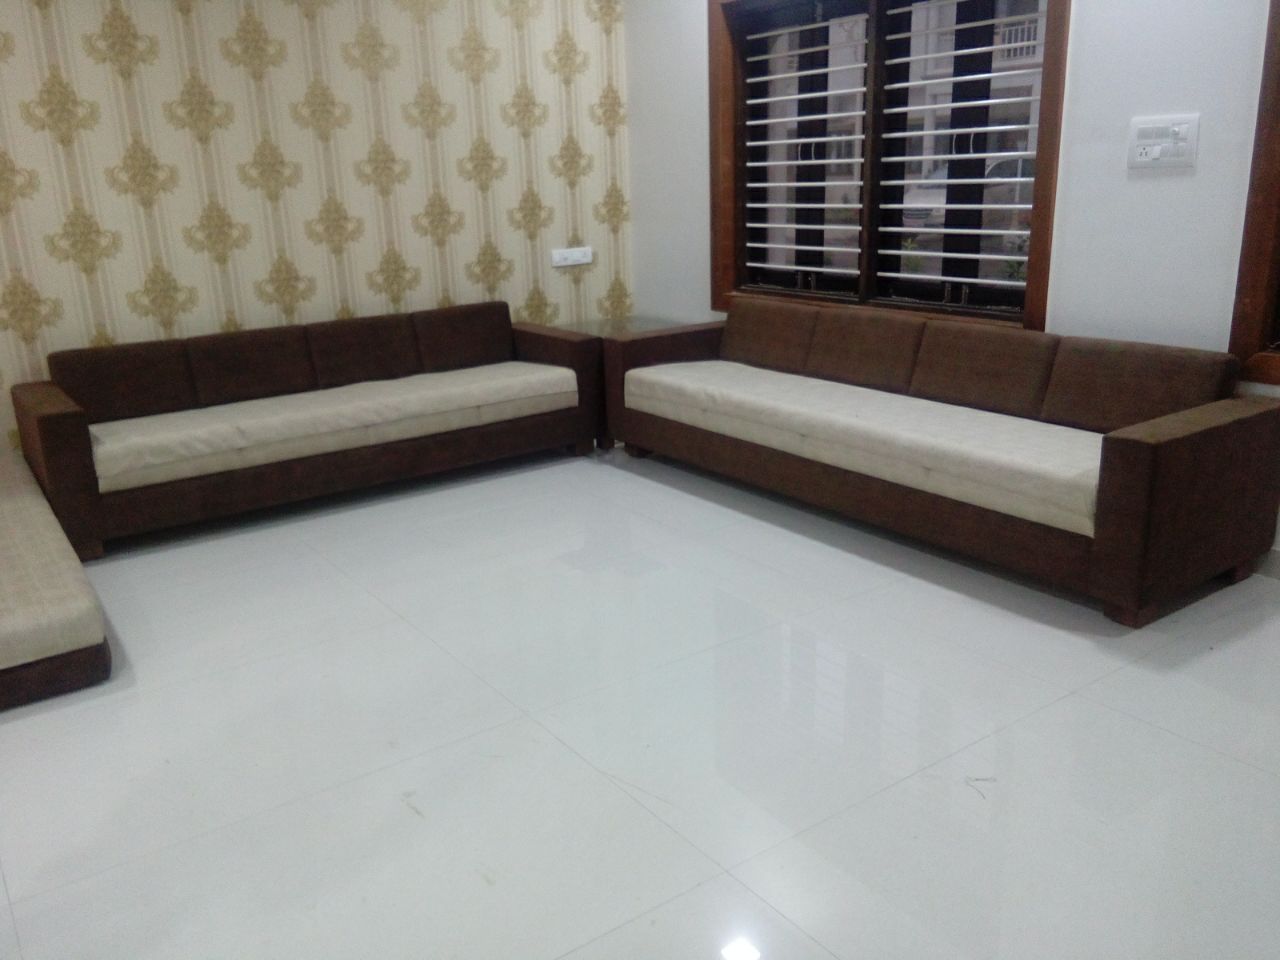 Printed Sofa FabricServicesBusiness OffersAll IndiaNew Delhi Railway Station